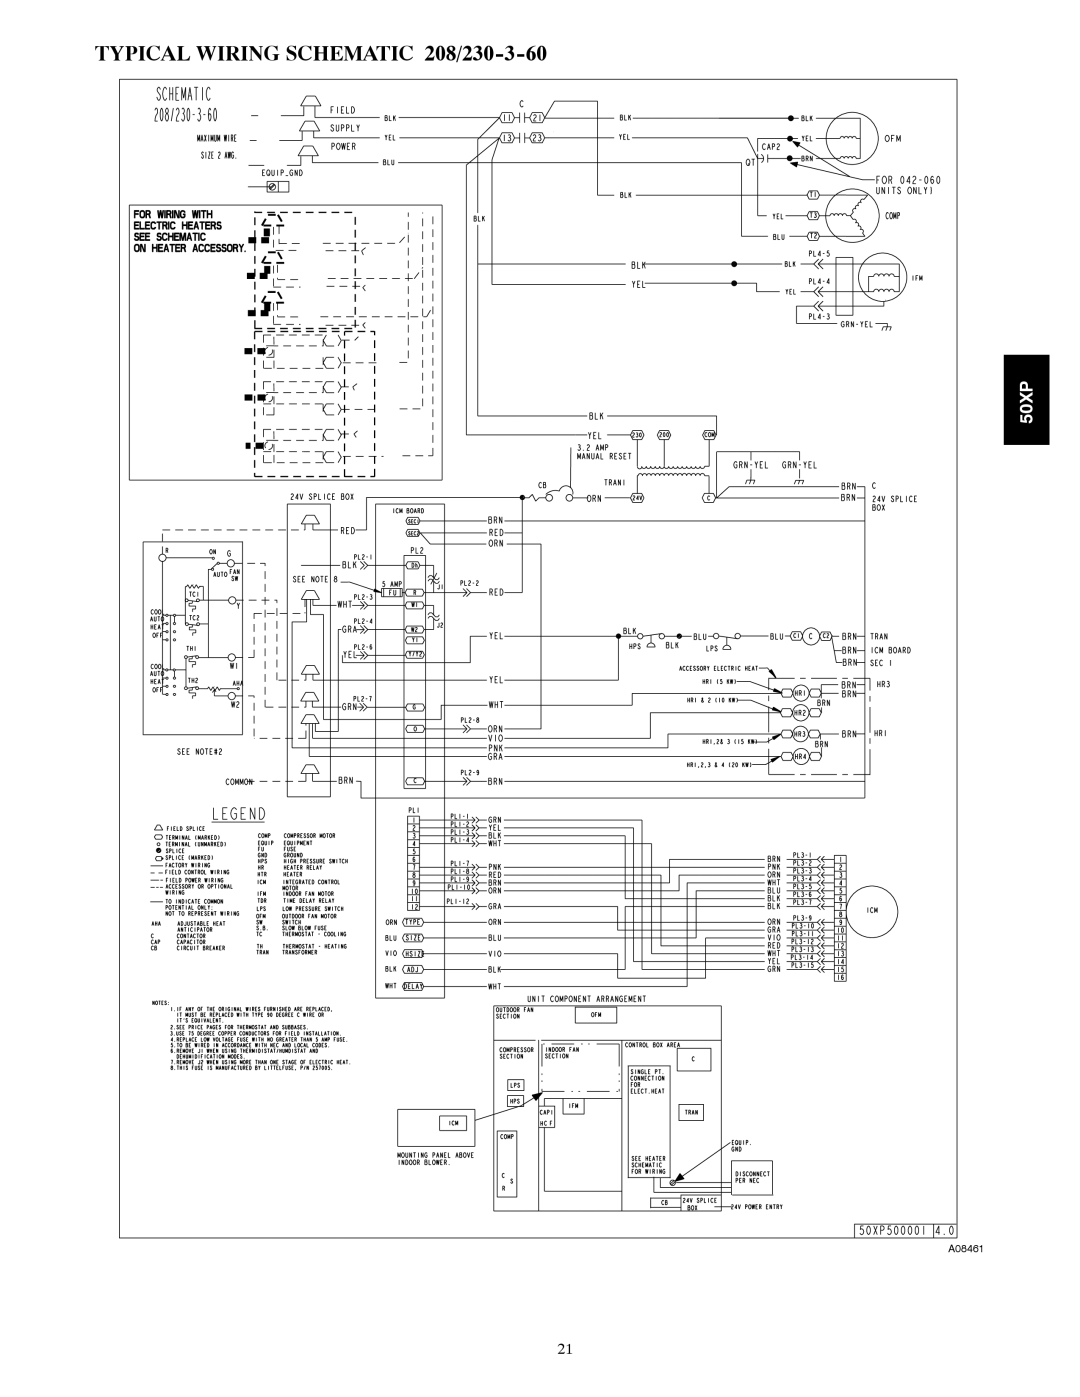 Carrier 50XP manual TYPICAL WIRING SCHEMATIC 208/230-3-60, A08461 